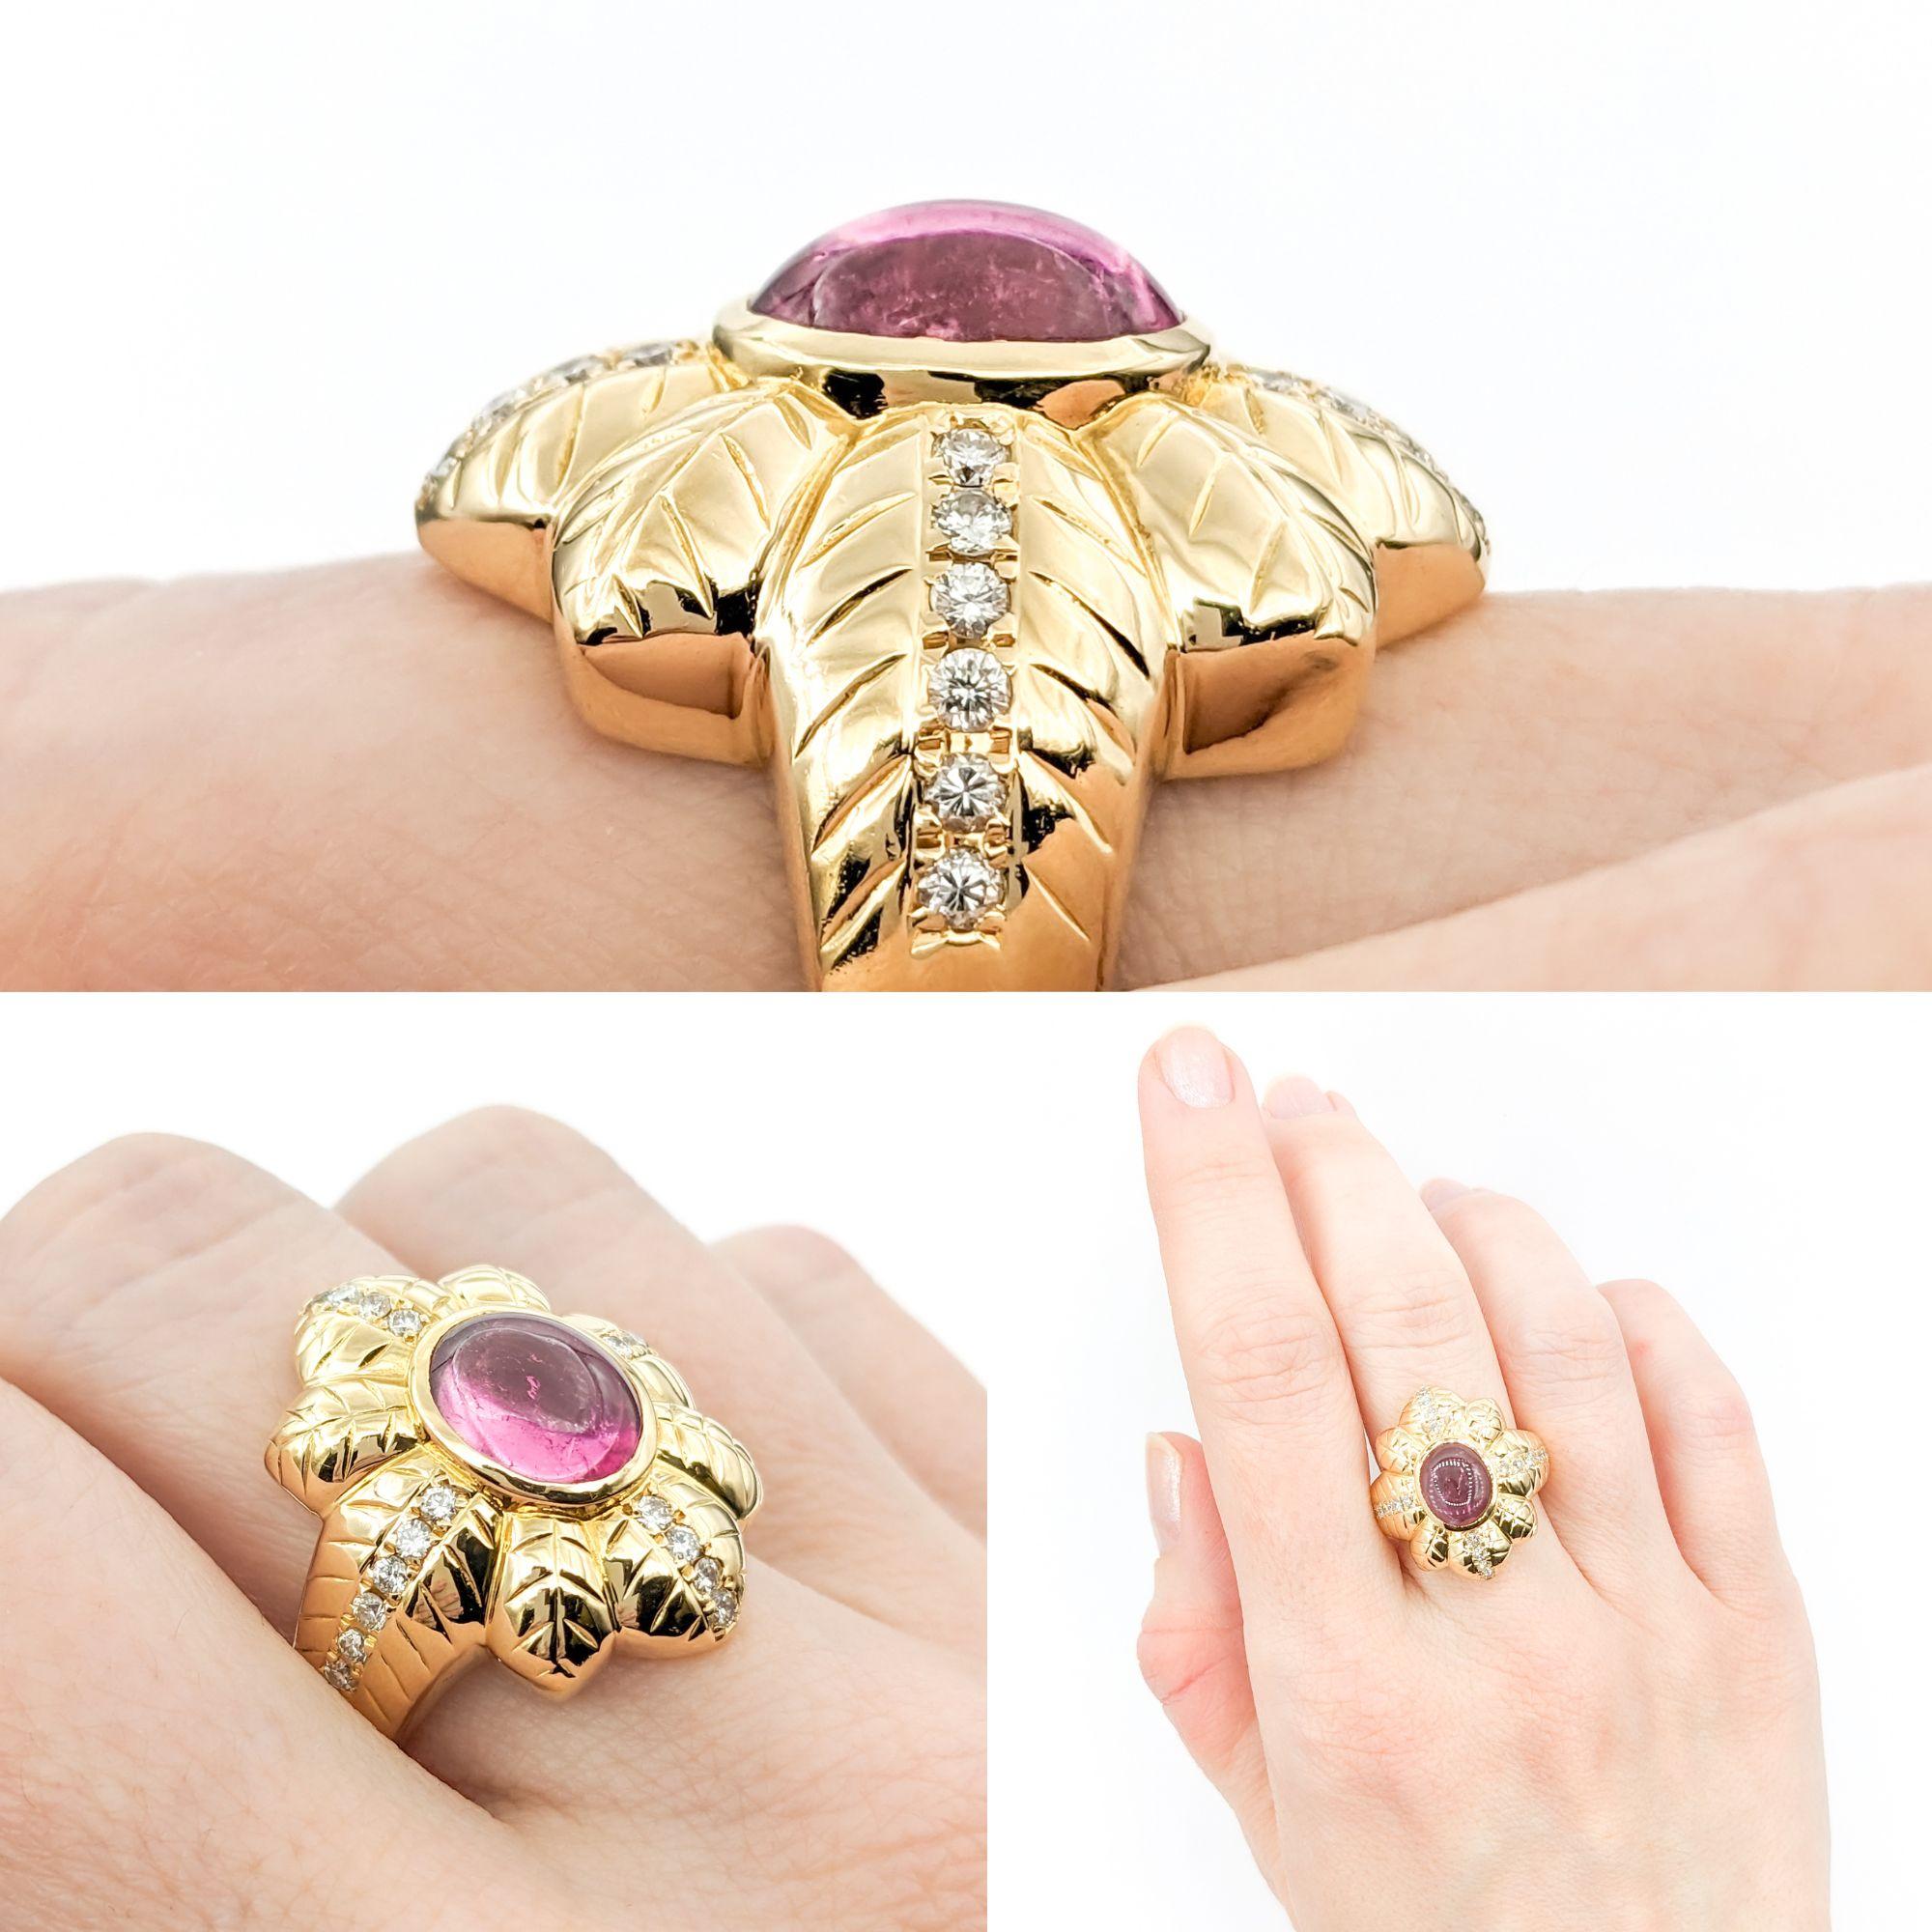 2.48ct Pink Tourmaline & Diamond Ring In Yellow Gold


This exquisite gemstone fashion ring is expertly crafted in 18kt yellow gold, featuring a stunning 2.48ct cabochon pink tourmaline centerpiece, flanked by .40ctw of sparkling round diamonds with